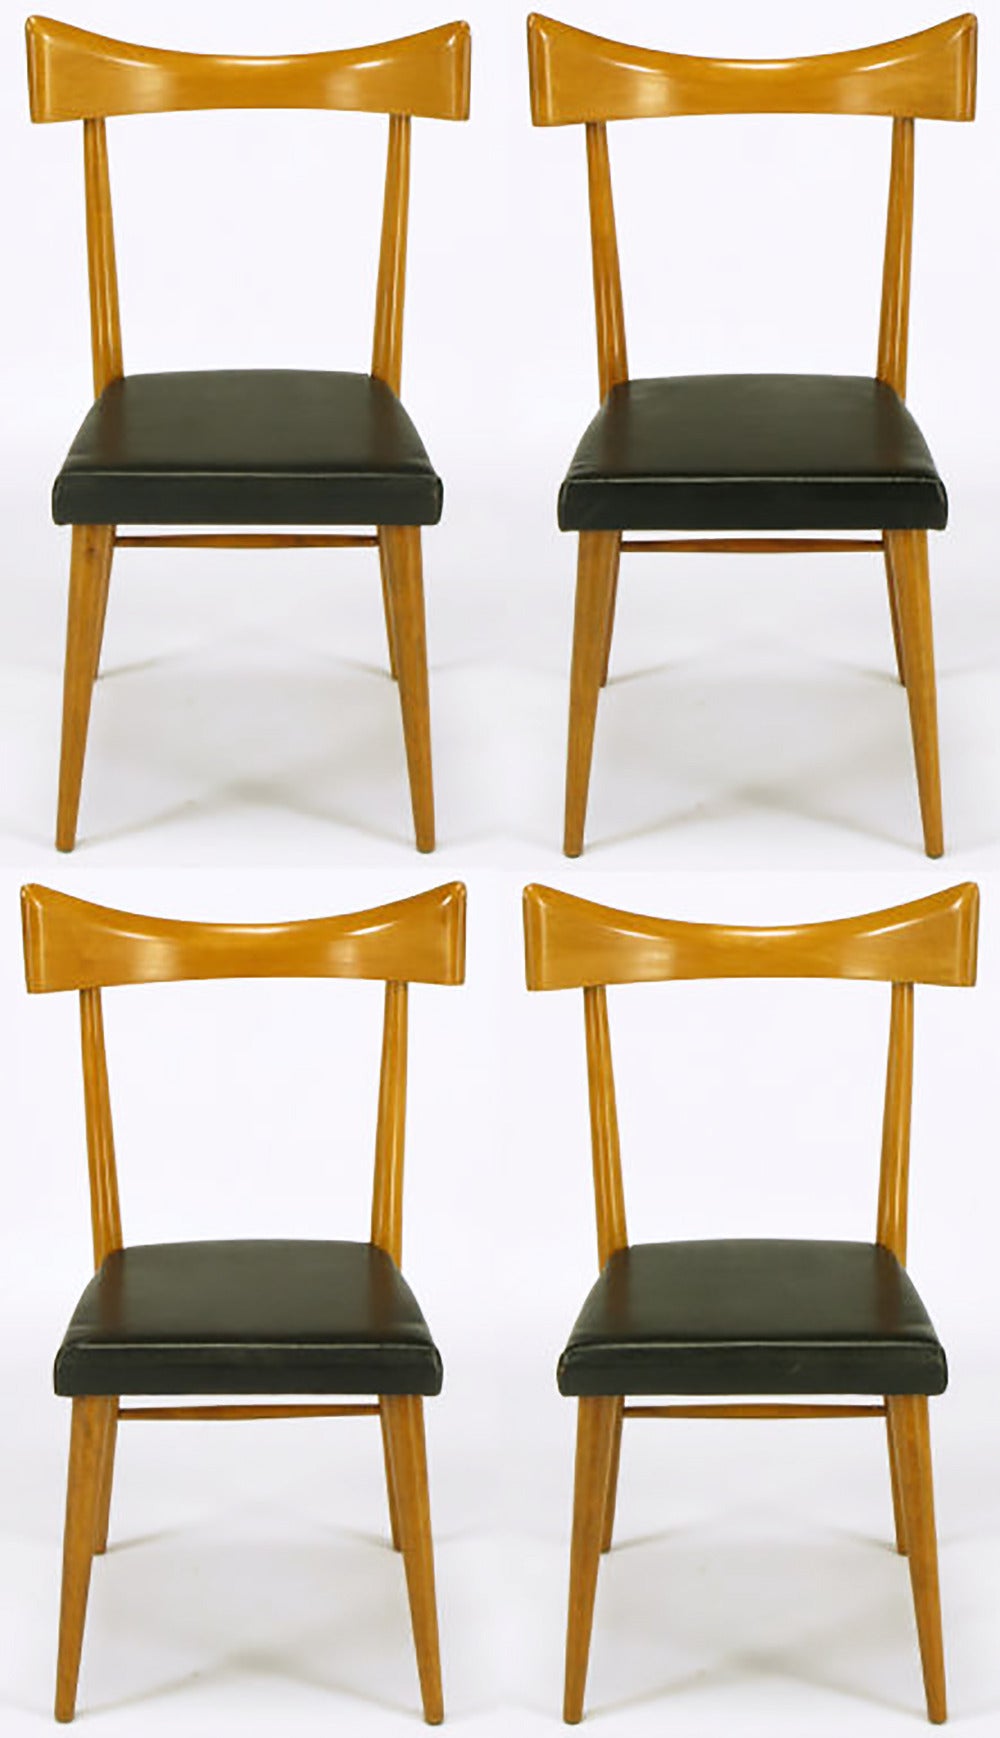 Rarely offered set of four Paul McCobb for Winchendon maple dining chairs with open back and large curved top rail. Free of ornamentation, the clean lined shape is only broken up by the black vinyl seat covering. Large curved M-shaped top rail is